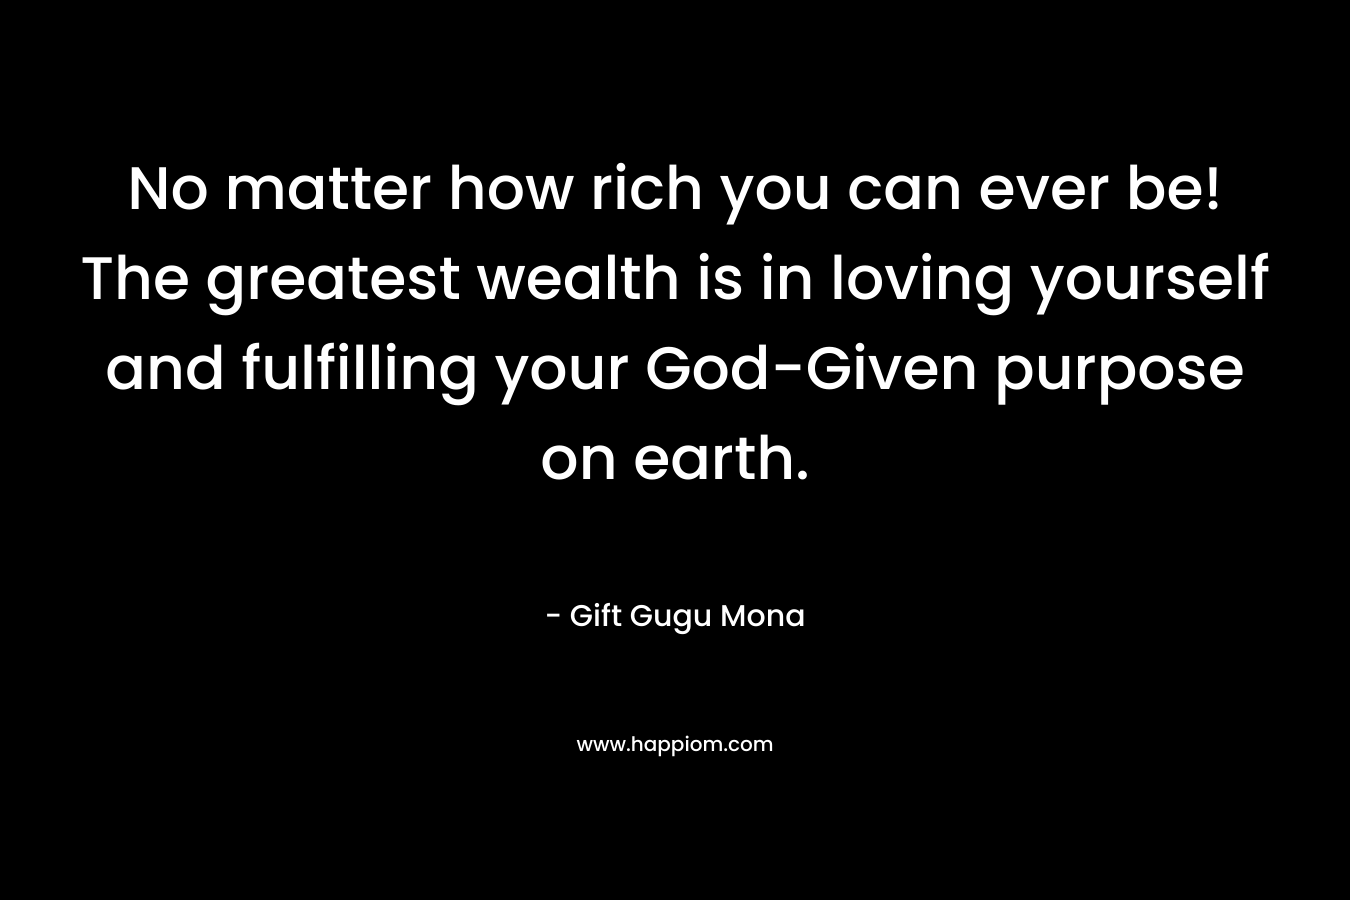 No matter how rich you can ever be! The greatest wealth is in loving yourself and fulfilling your God-Given purpose on earth. – Gift Gugu Mona